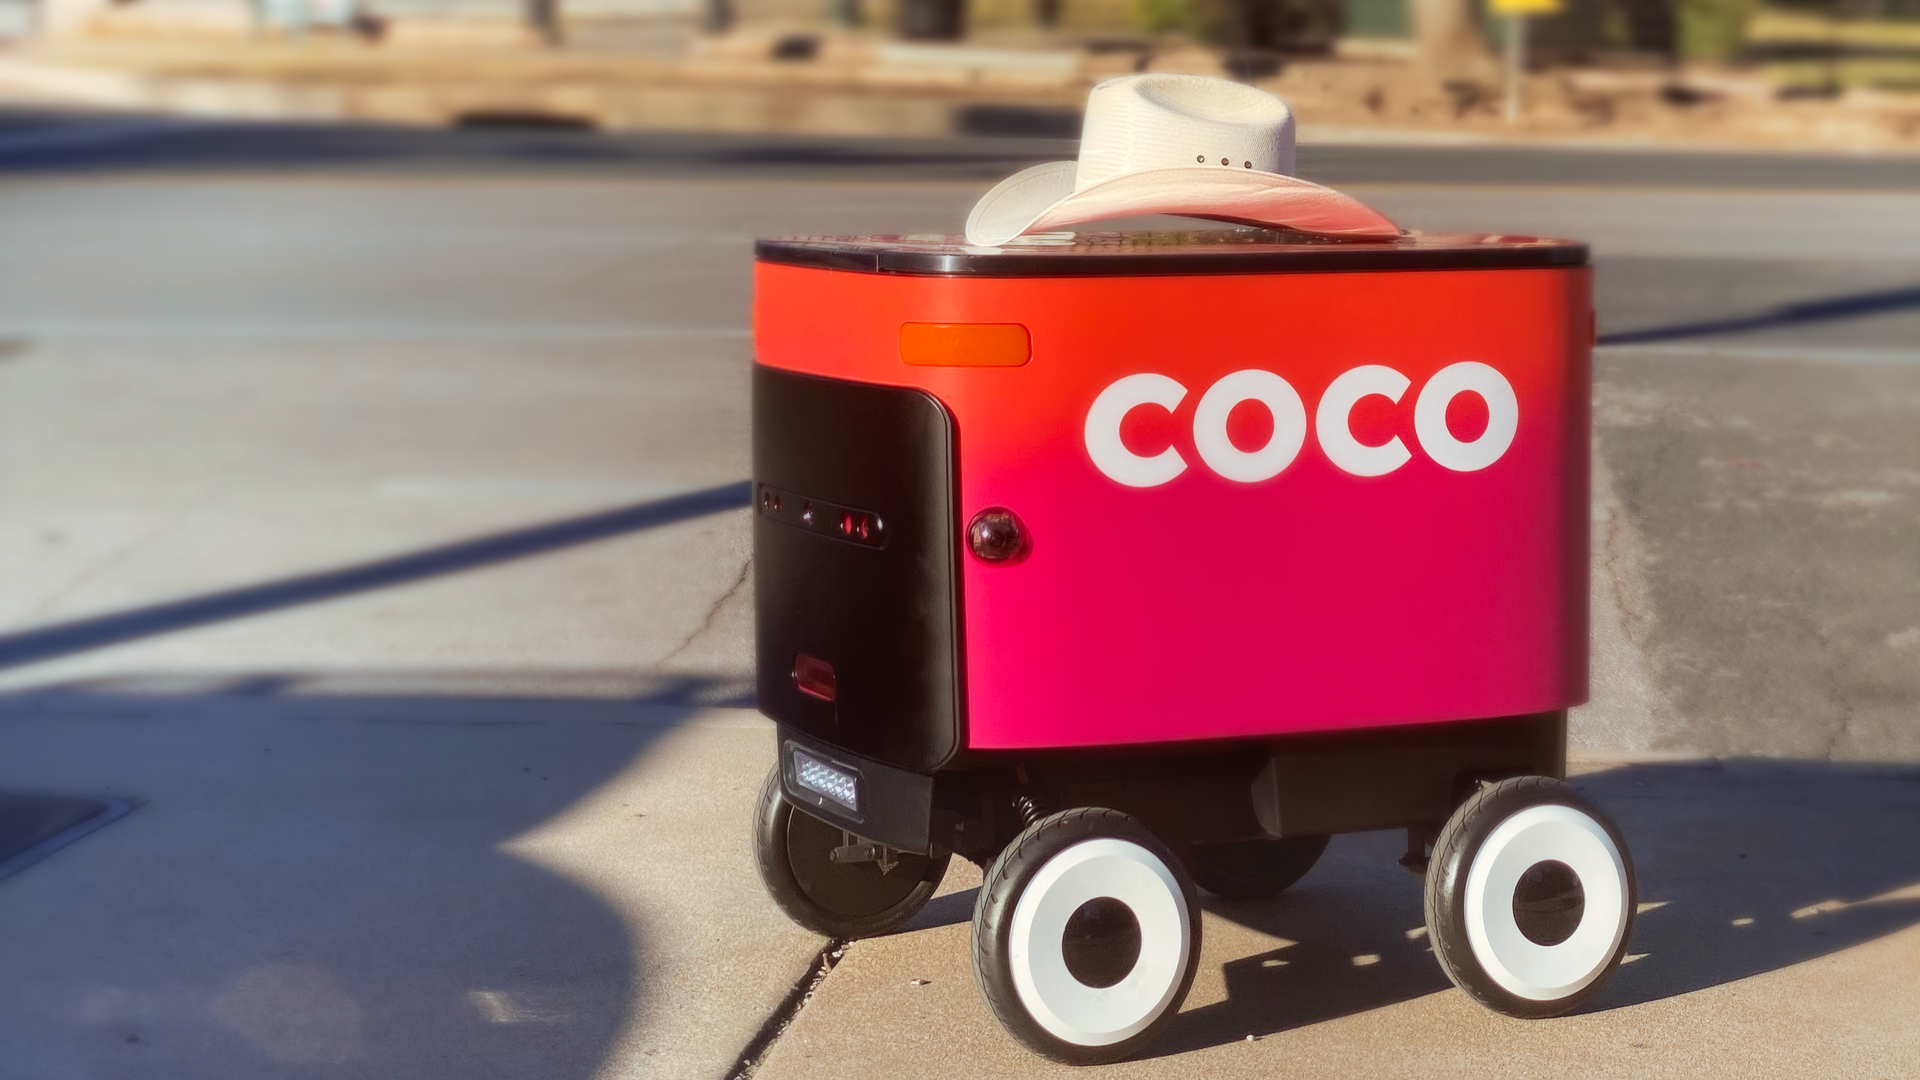 A small, wheeled Coco food delivery robot.